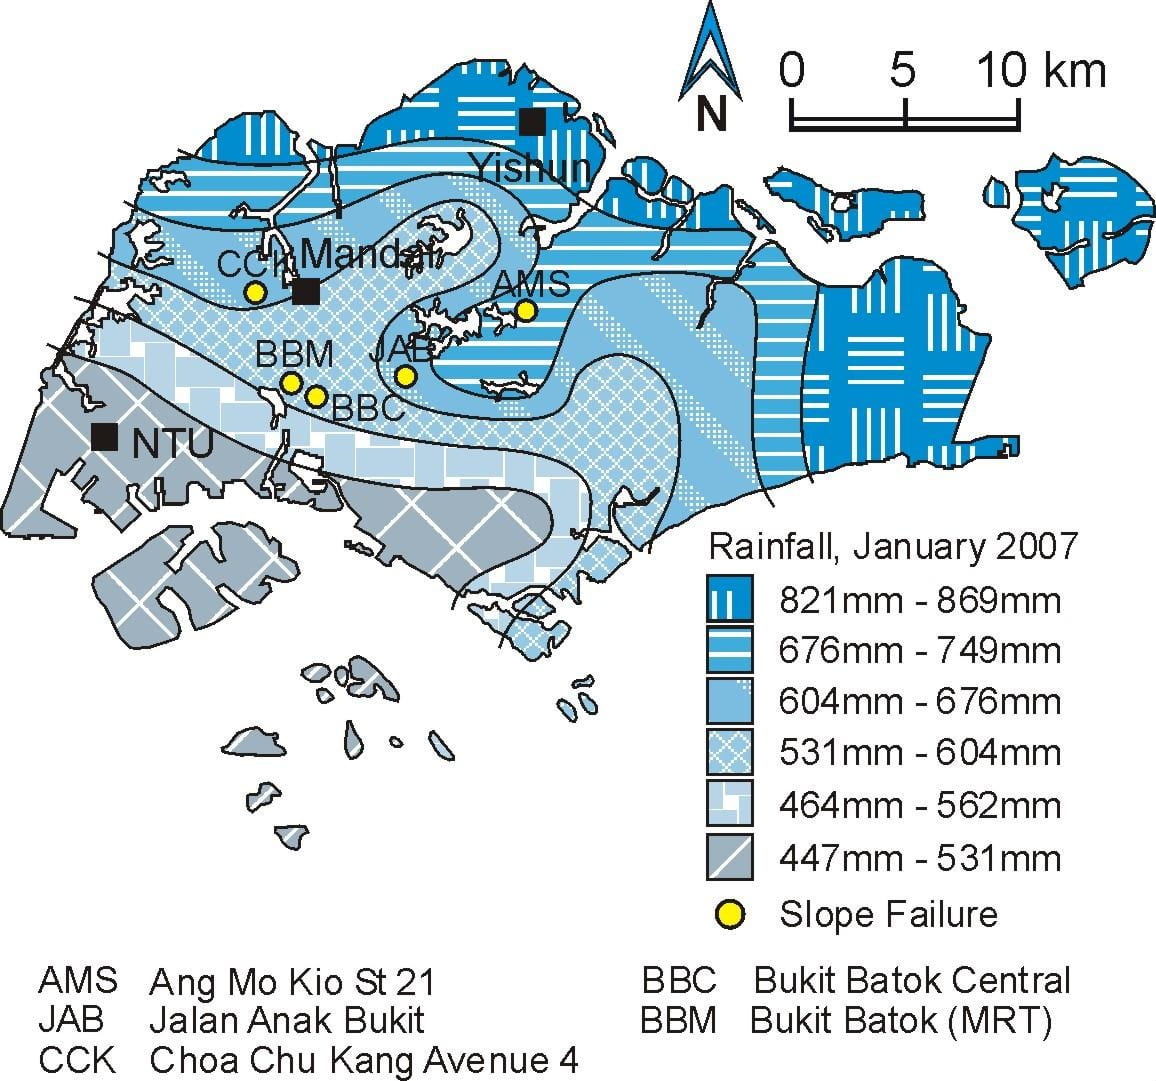 Distribution of rainfall and slope failures during the month of January 2007 (after NEA, 2007), Rahardjo et al 2007